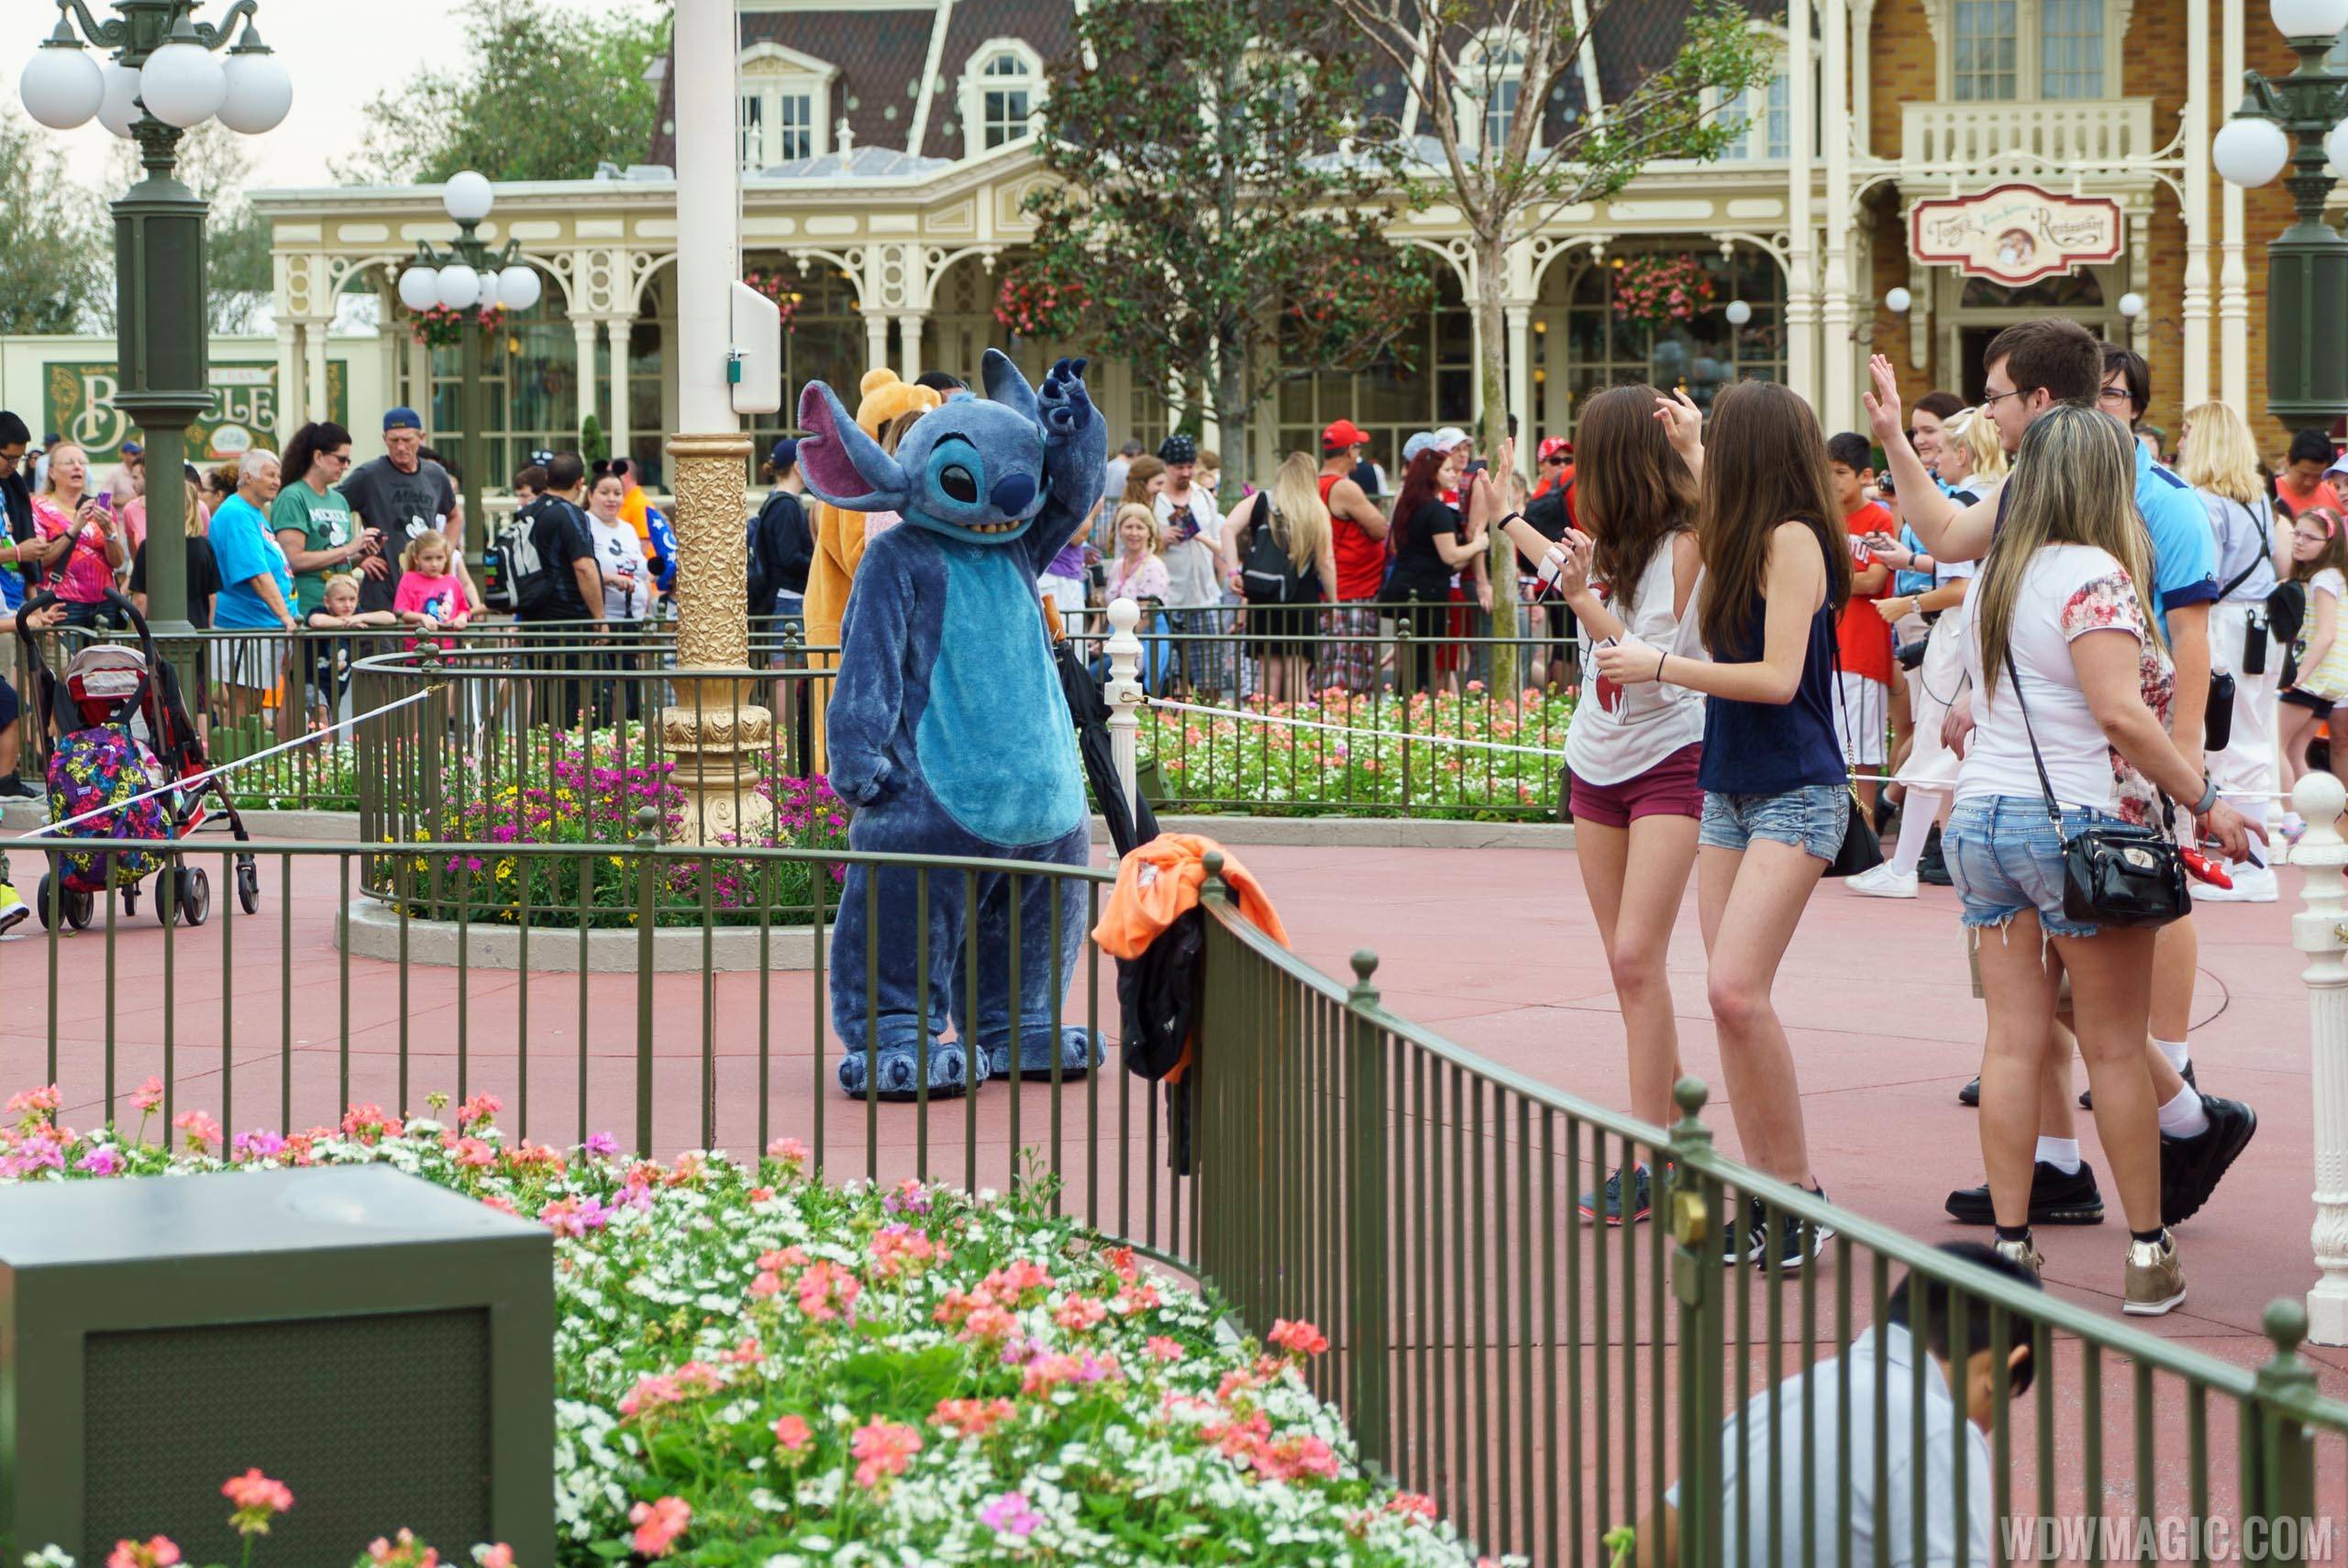 PHOTO - Stitch now appearing for meet and greets in the Magic Kingdom's Town Square